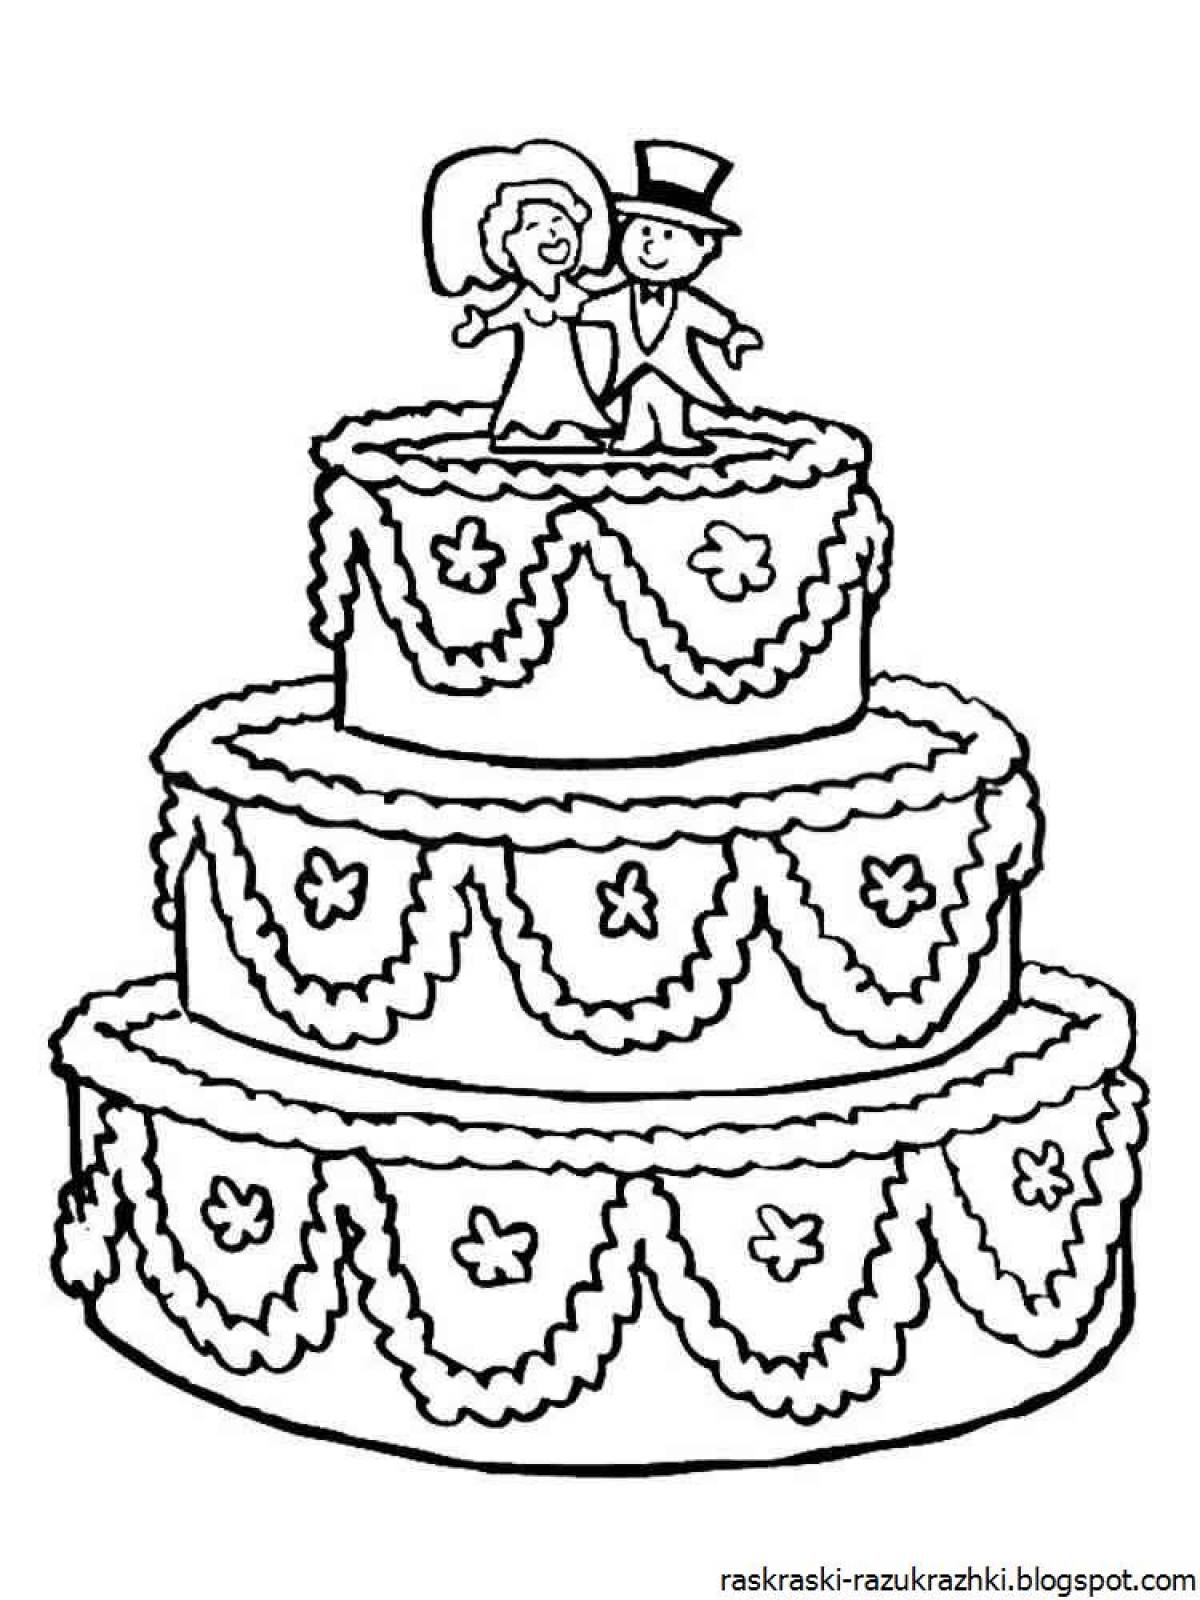 Fancy cake coloring for kids